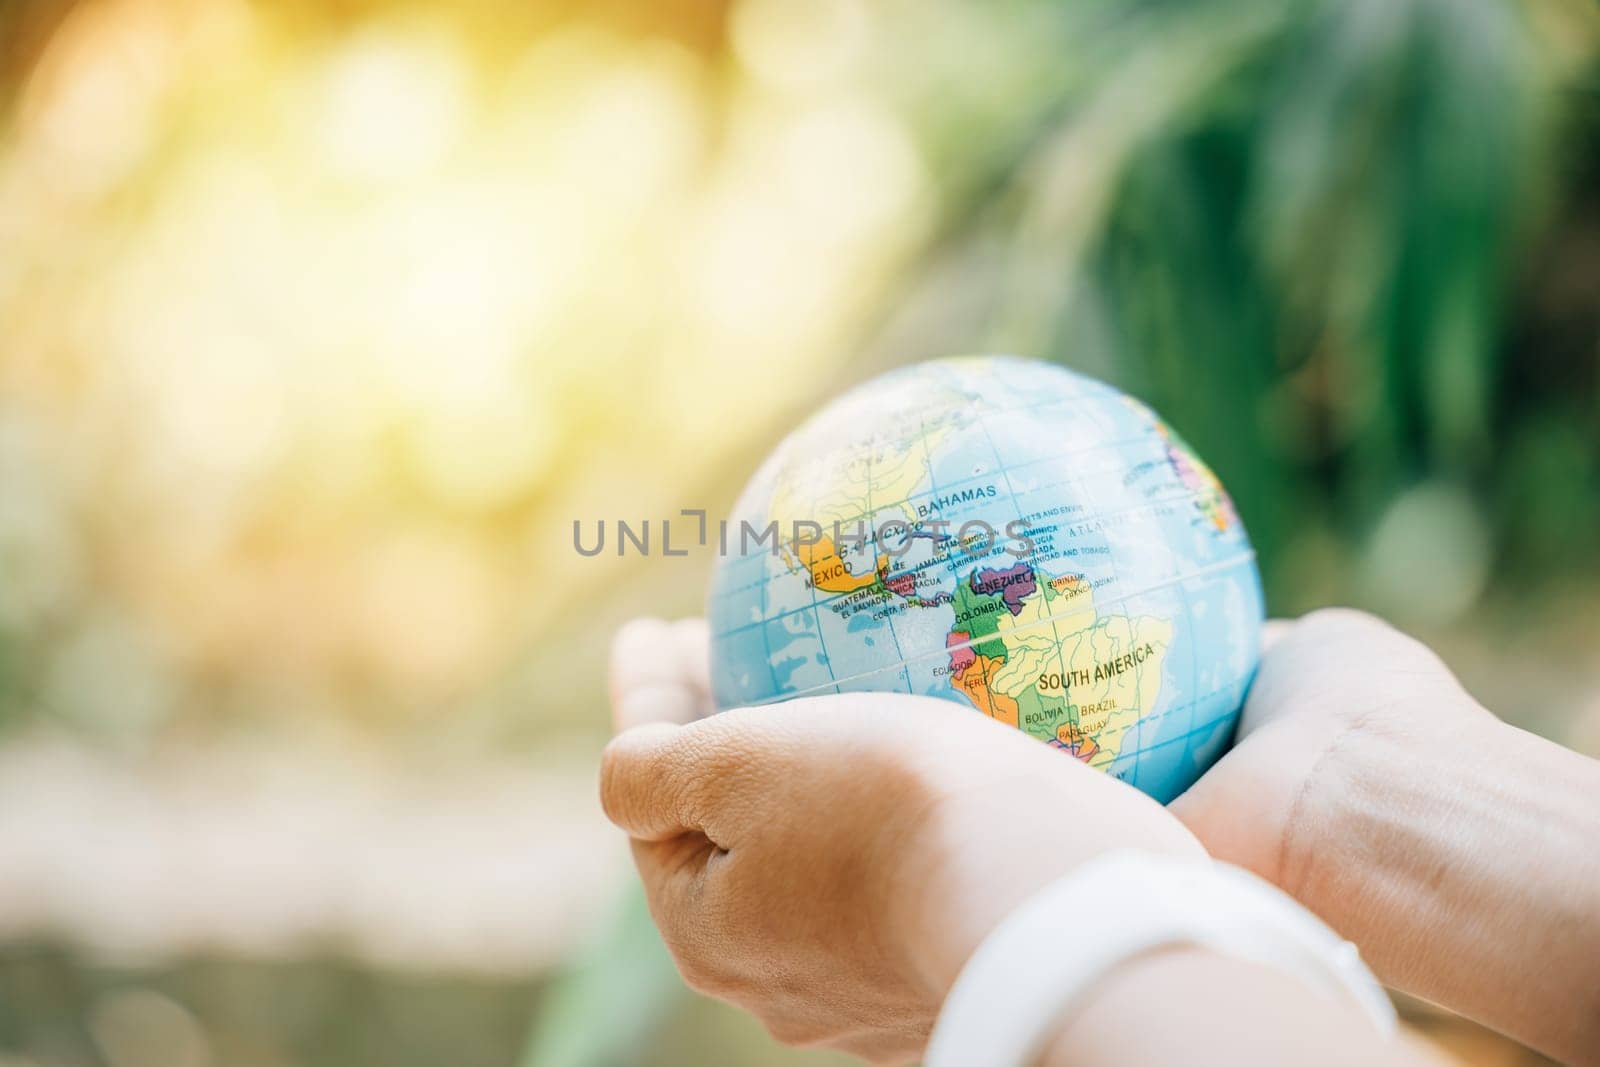 On Environment and Earth Day, hold the Green Planet to signify Earth's preservation. This concept highlights responsibility, wisdom, and global support for our natural world.